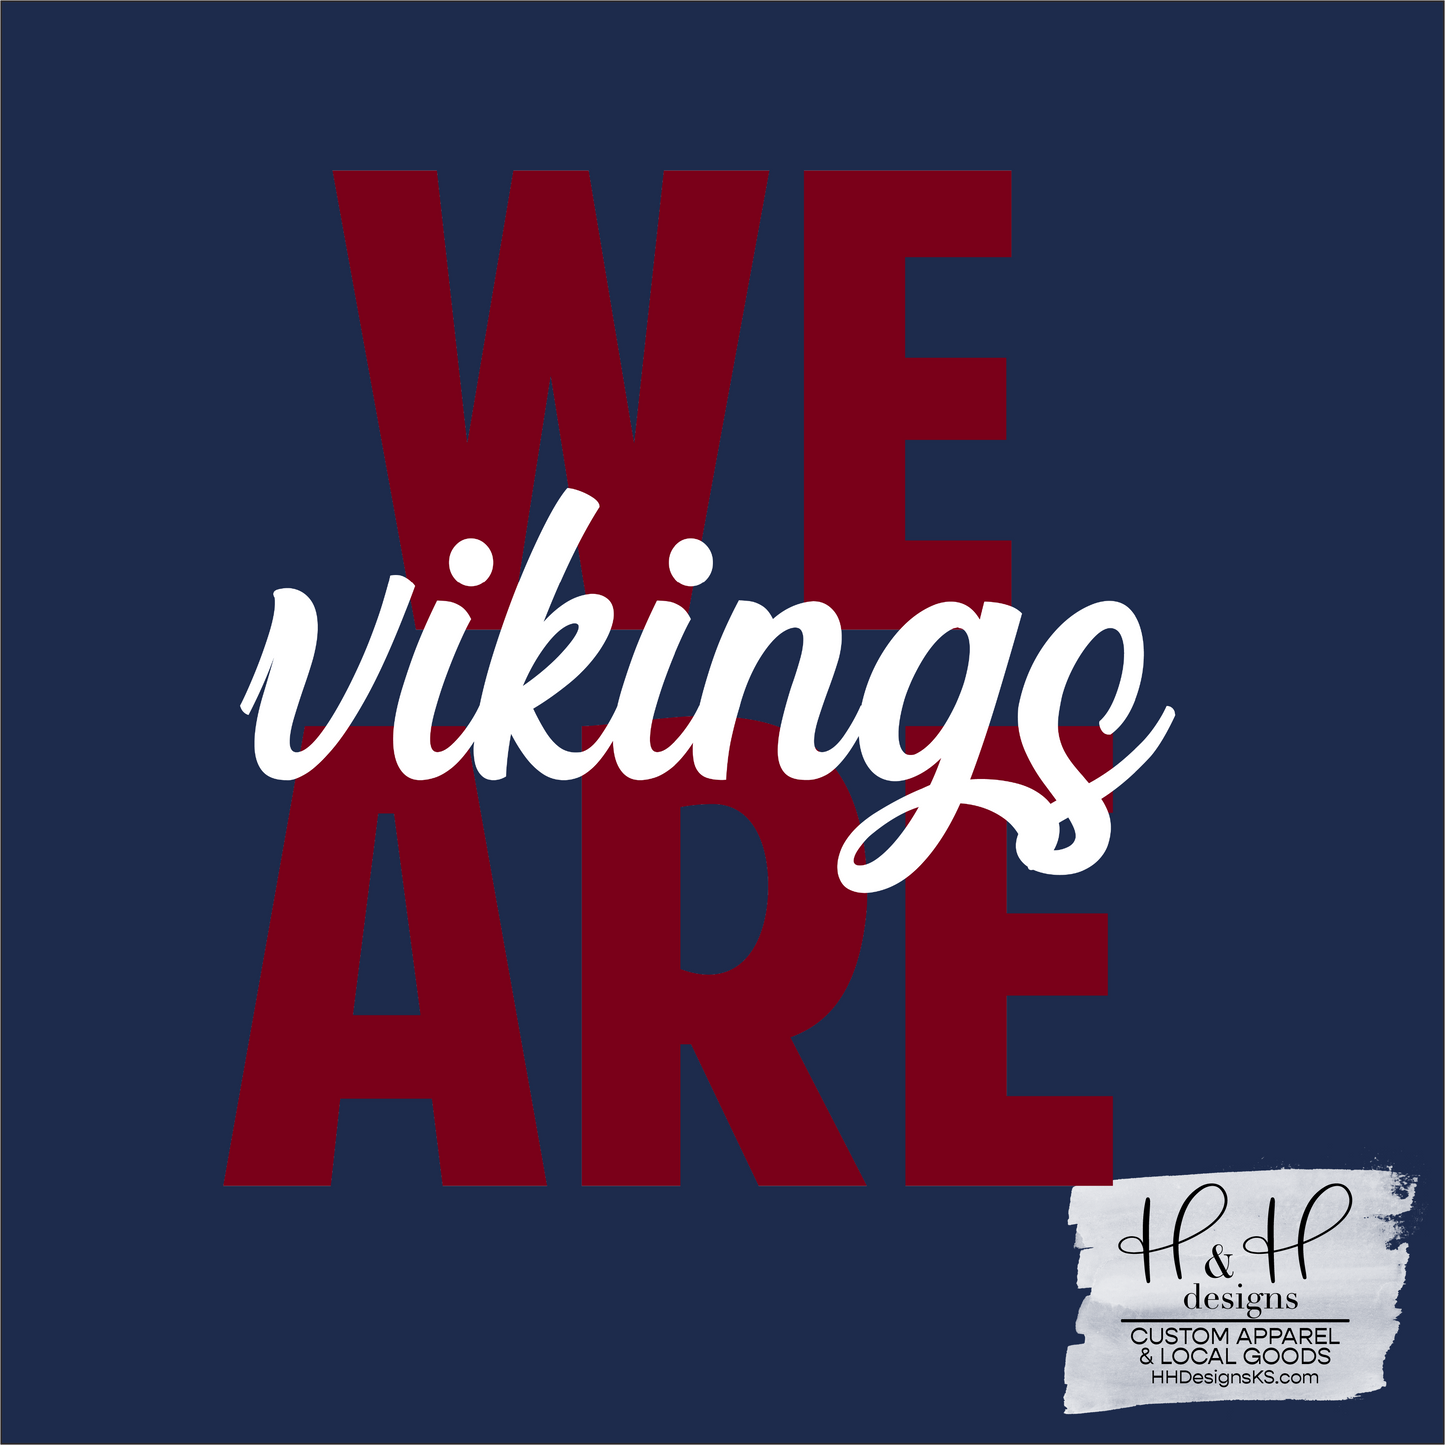 We are Vikings ~ Seaman Middle School PTO Fundraiser